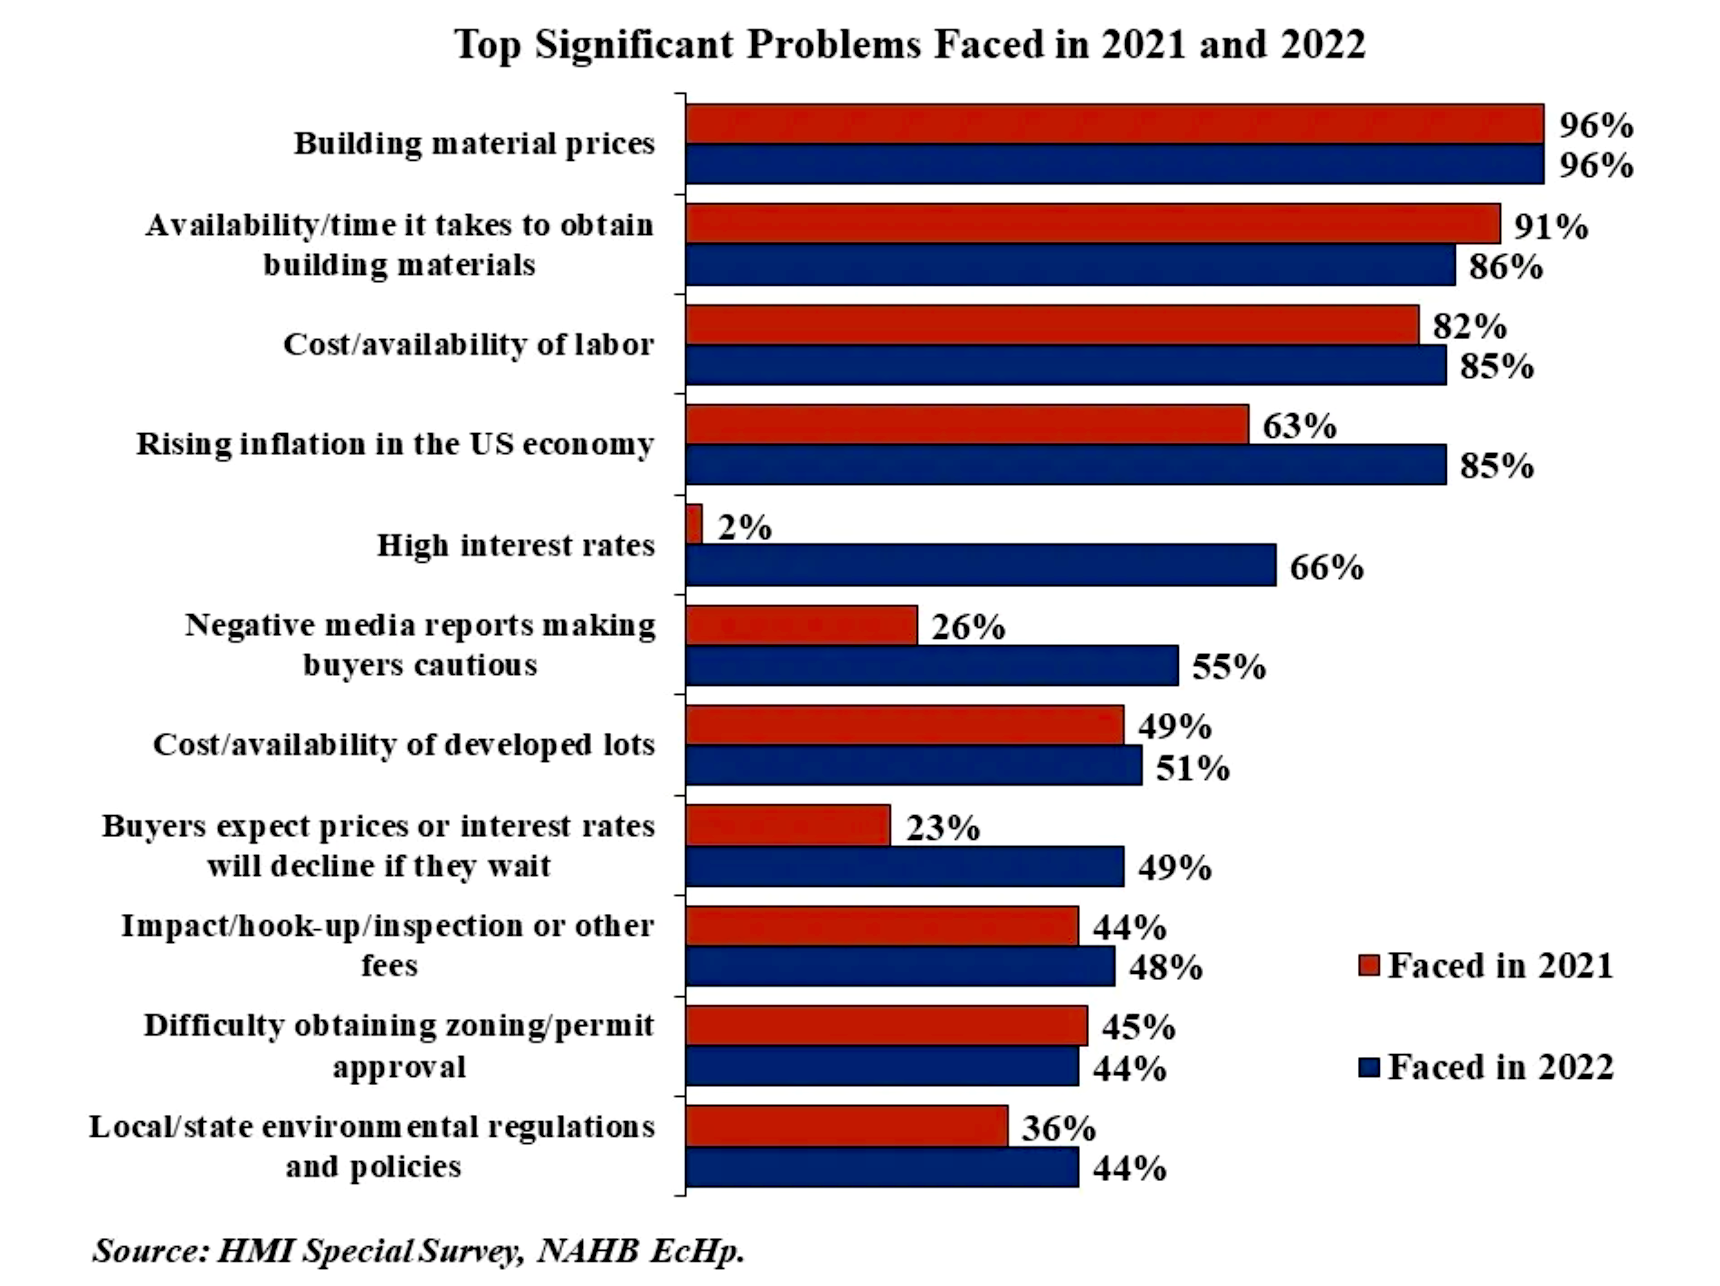 building material prices and availability were top, significant problems for builders in 2022